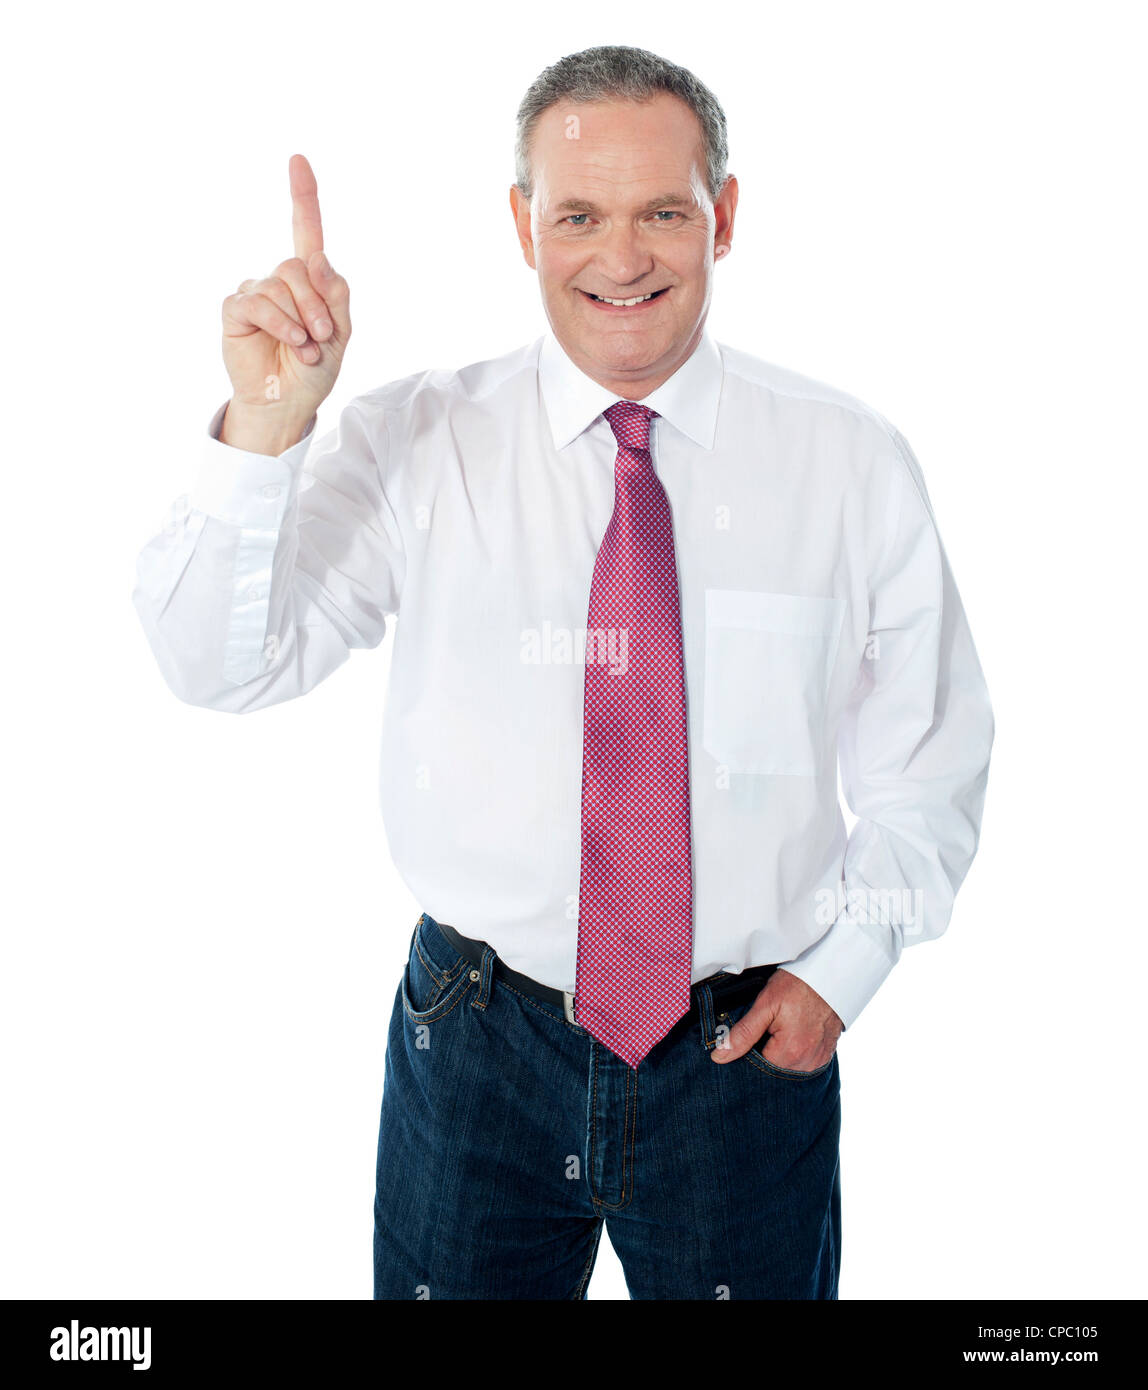 Smart businessperson pointing upwards over a white background Stock Photo